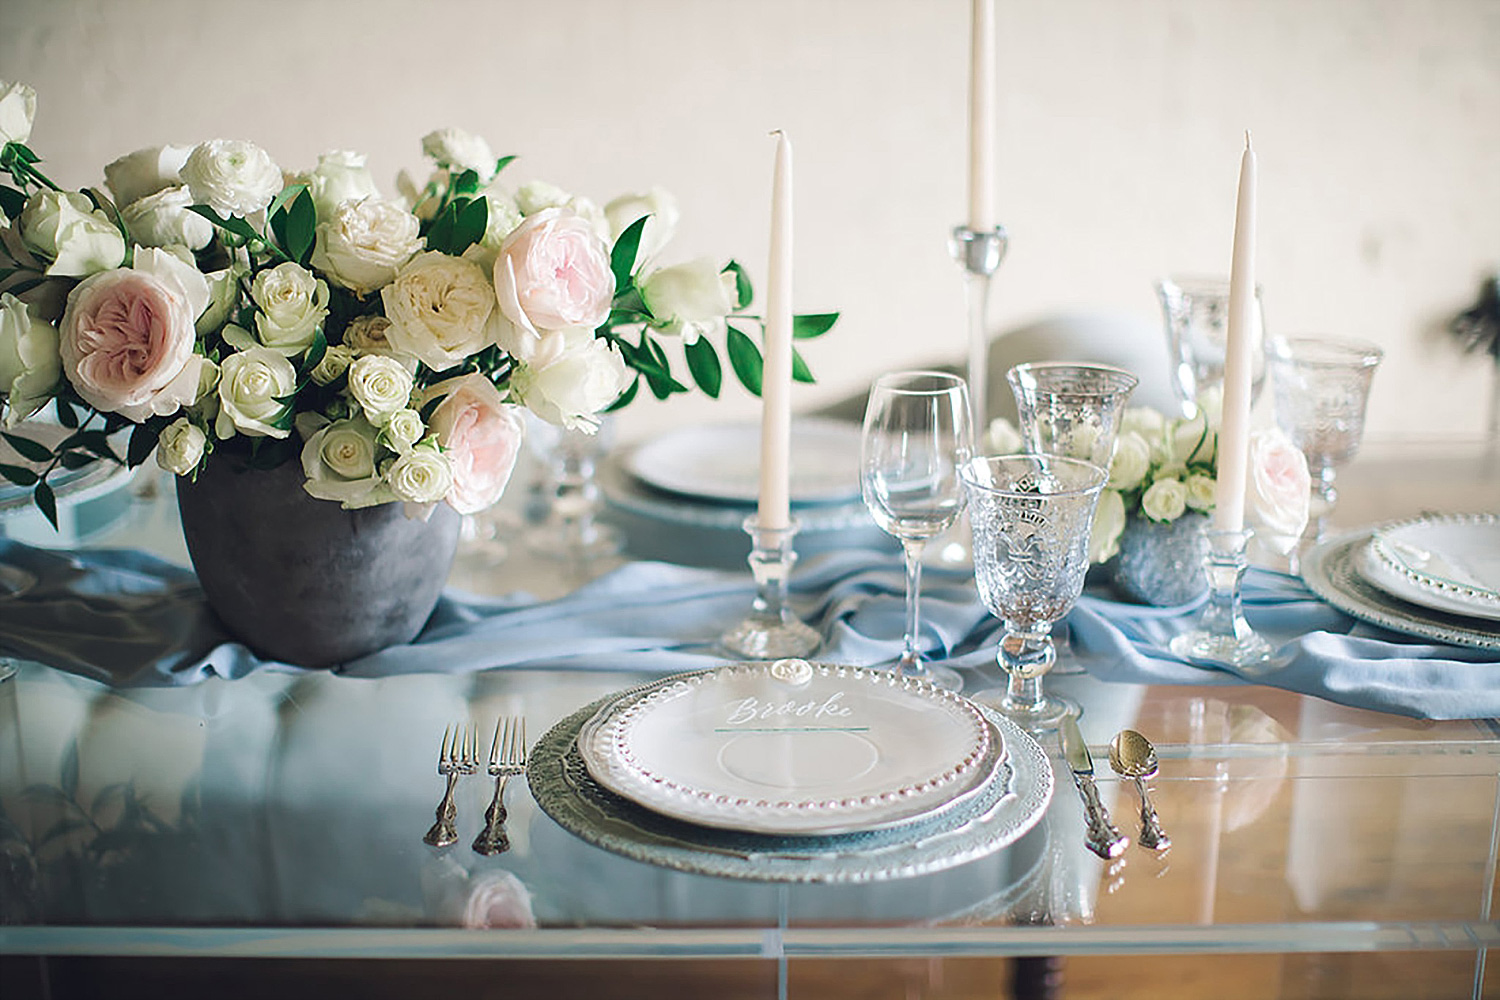 Dusty blue and white place setting with white tapered candles and white and blush flowers